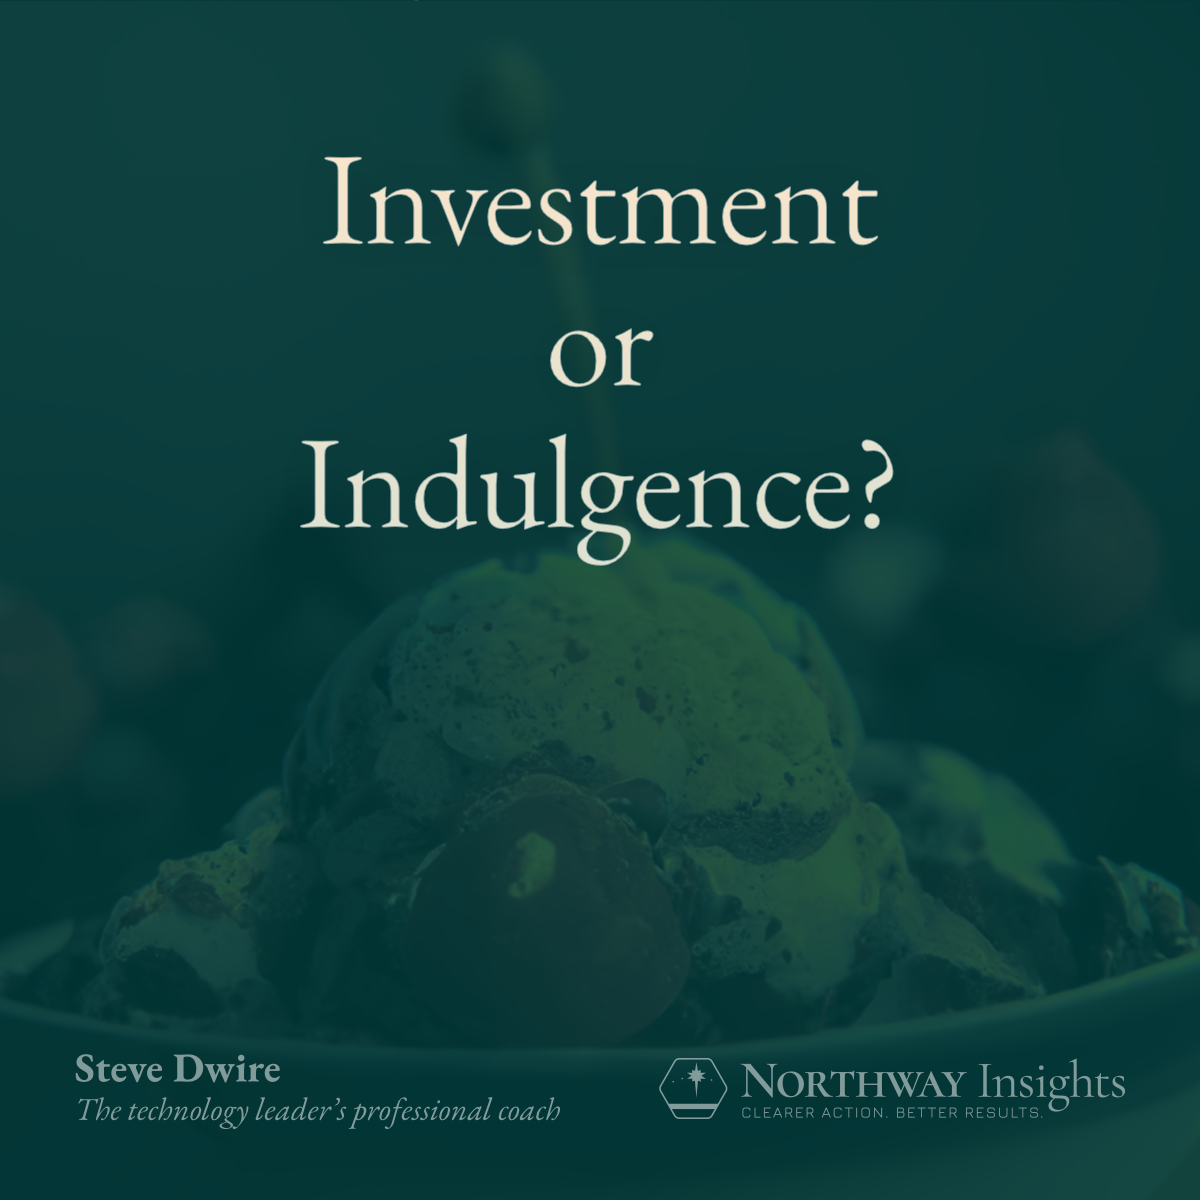 Investment or Indulgence?